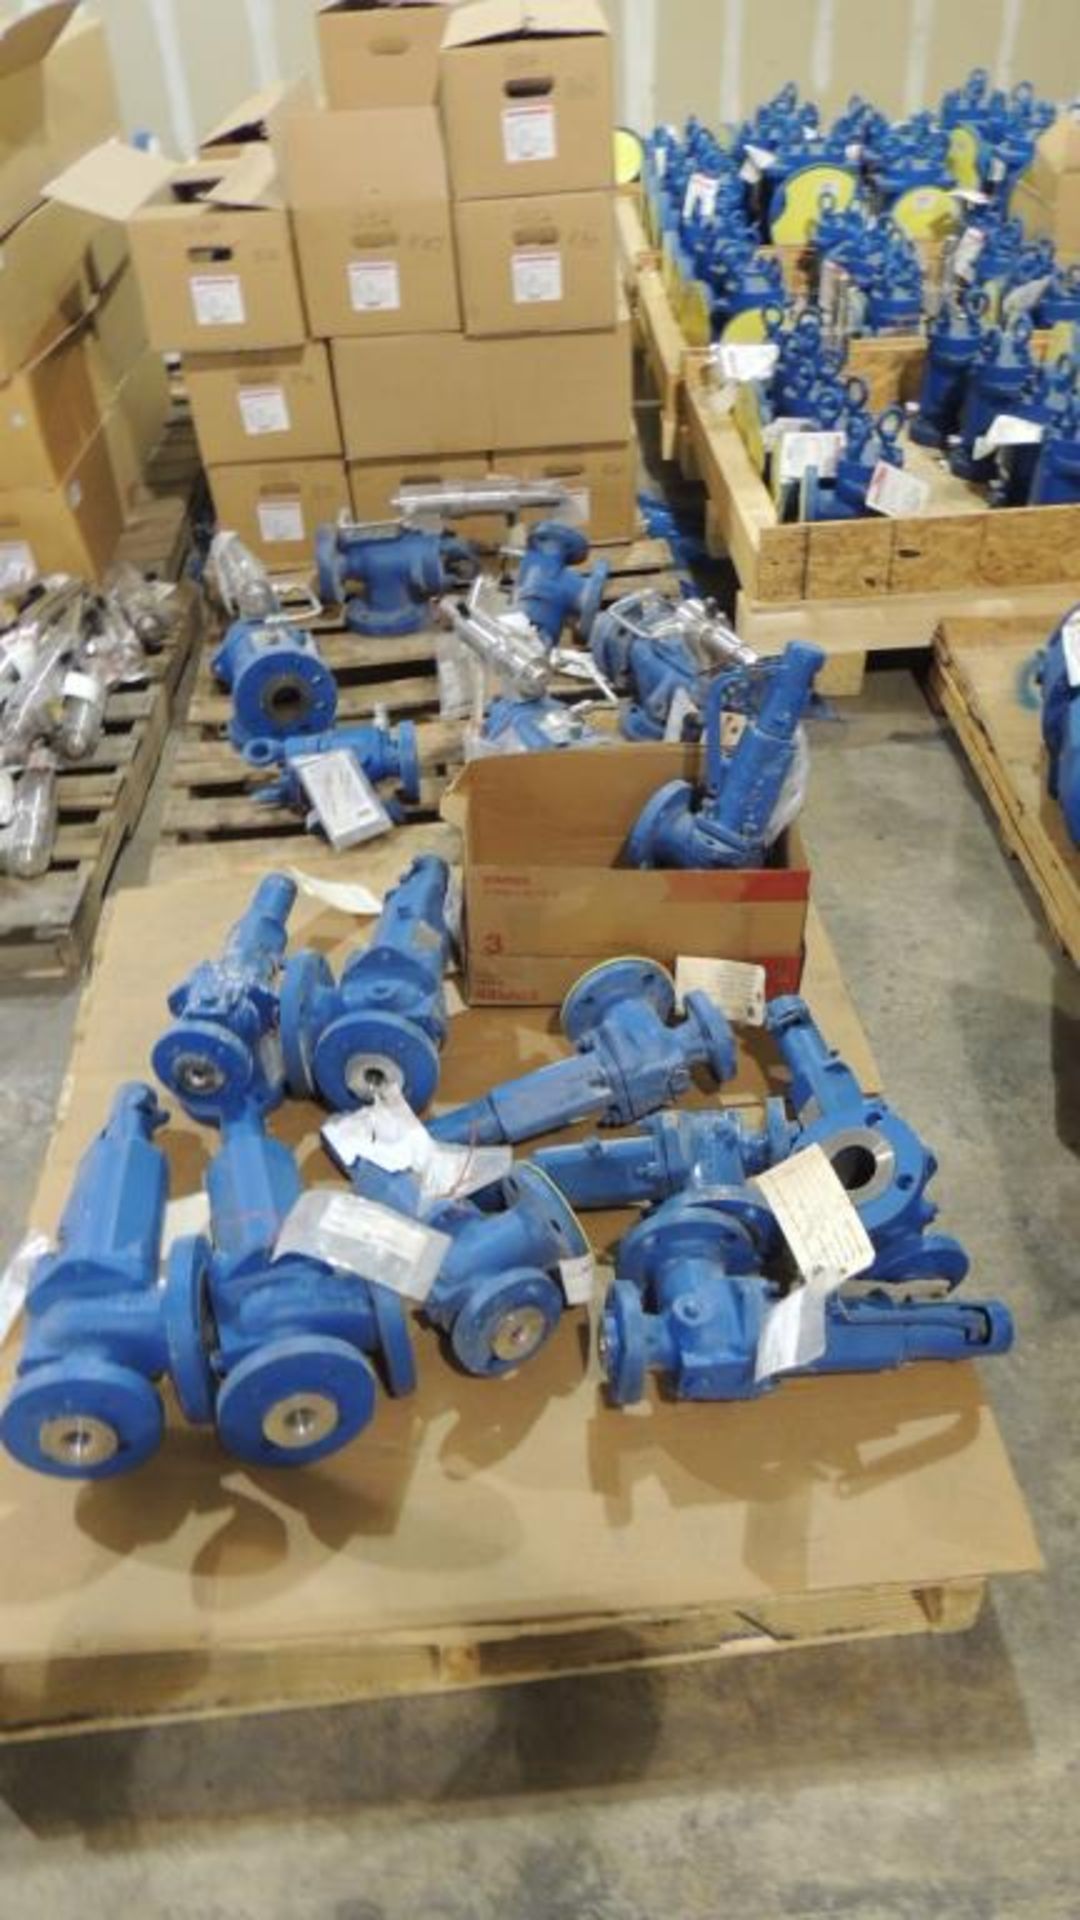 Large Quantity of Leser Relief and Safety Valves, plus Spare Parts Kits - Image 360 of 374